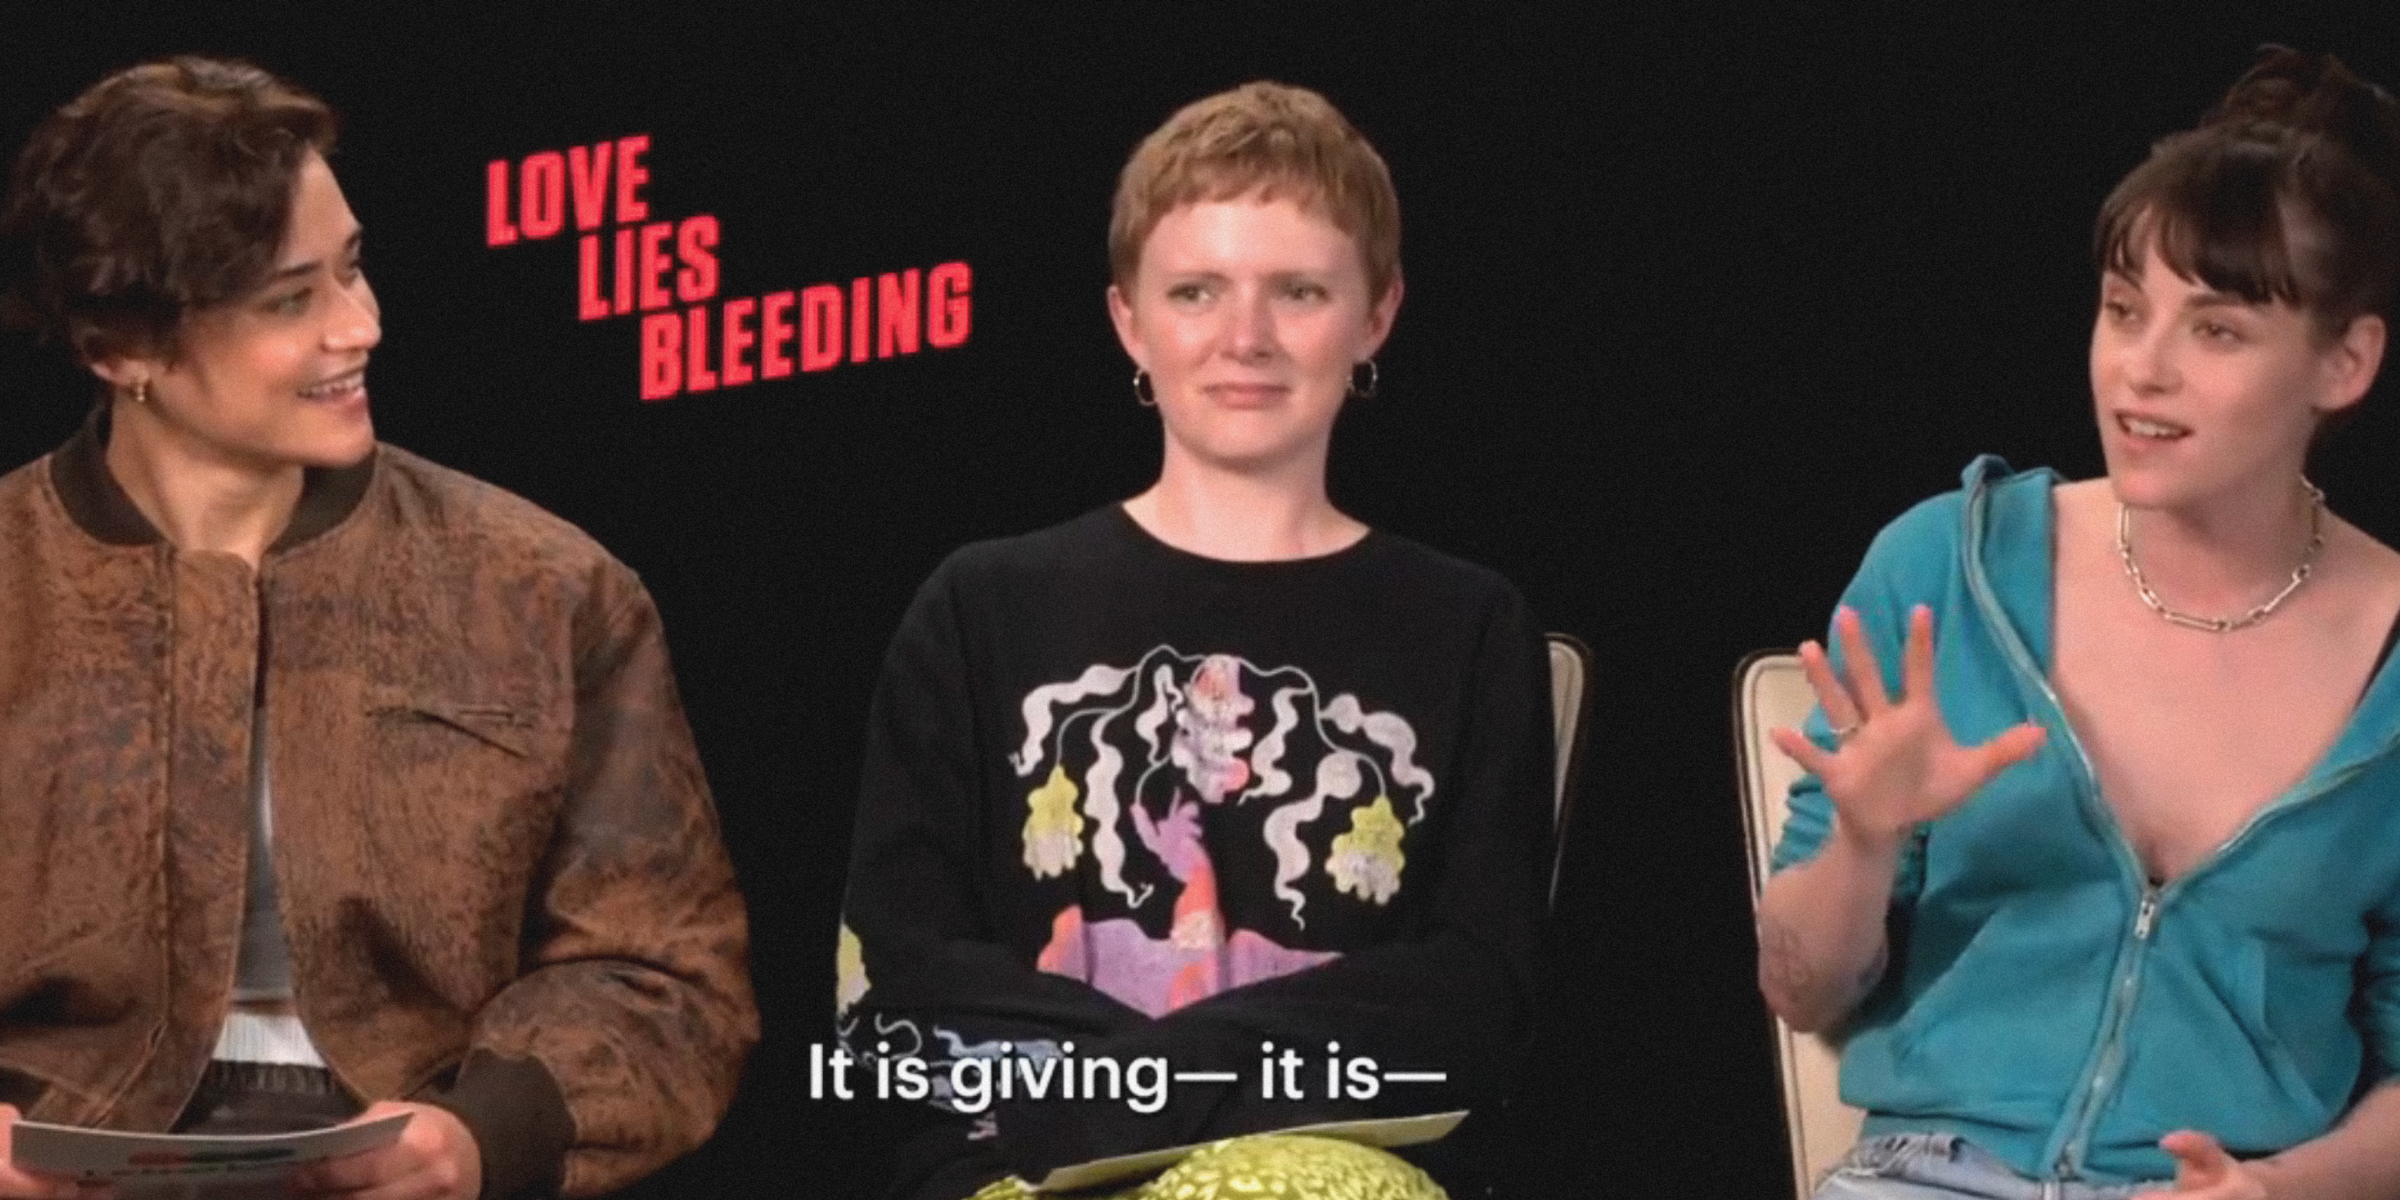 A screenshot of Katy O'Brian, Rose Glass, and Kristen Stewart being interviewed by Letterboxd. The subtitle says "It is giving— it is—"